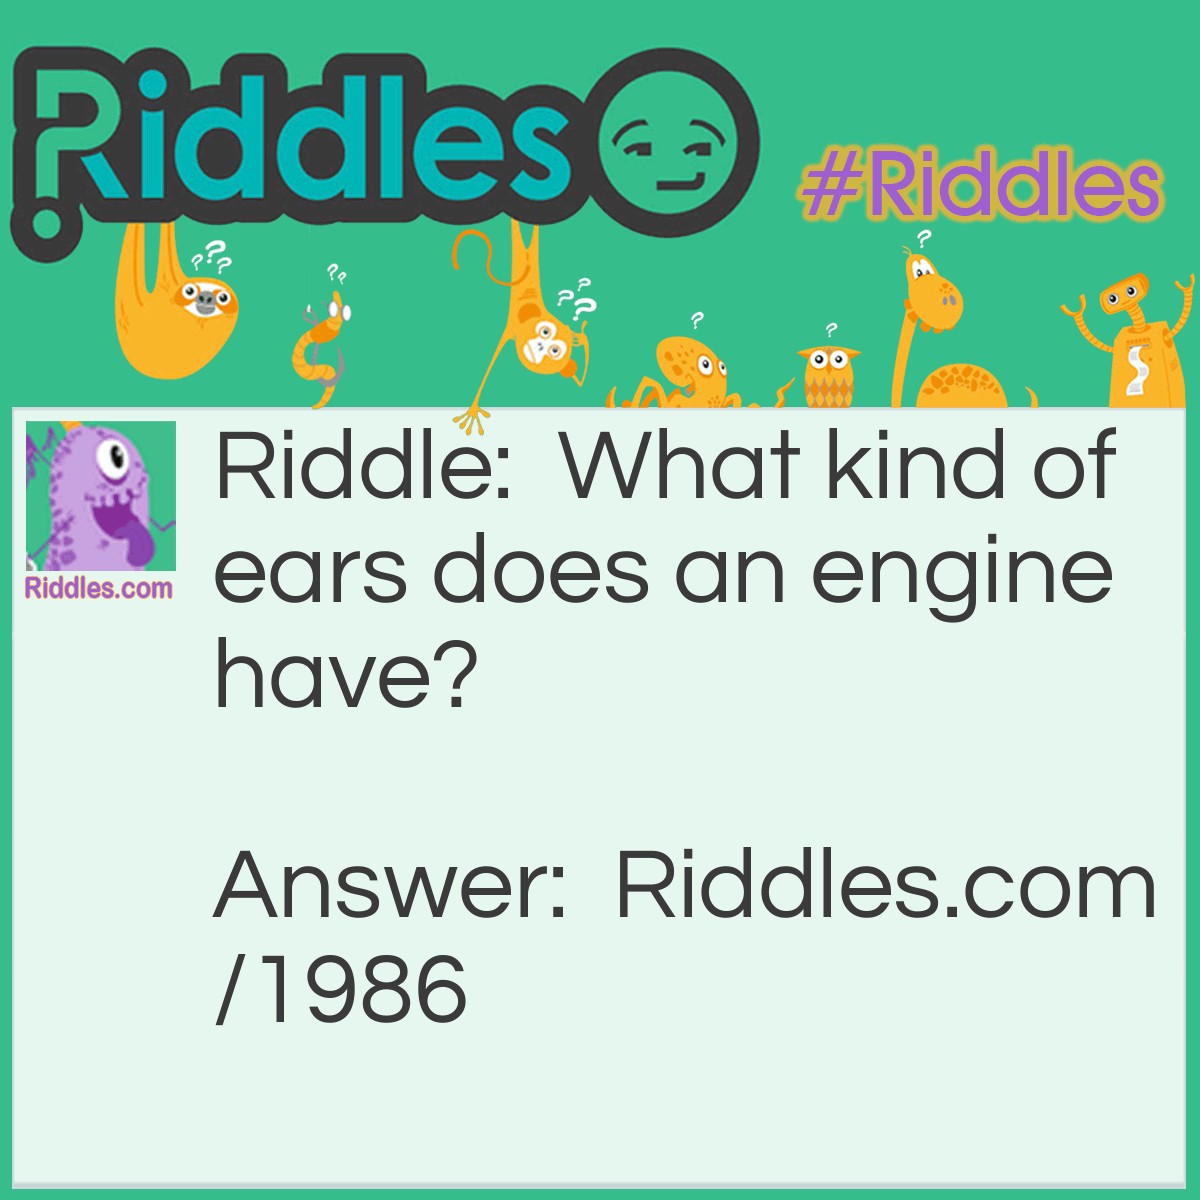 Riddle: What kind of ears does an engine have? Answer: Engineers.